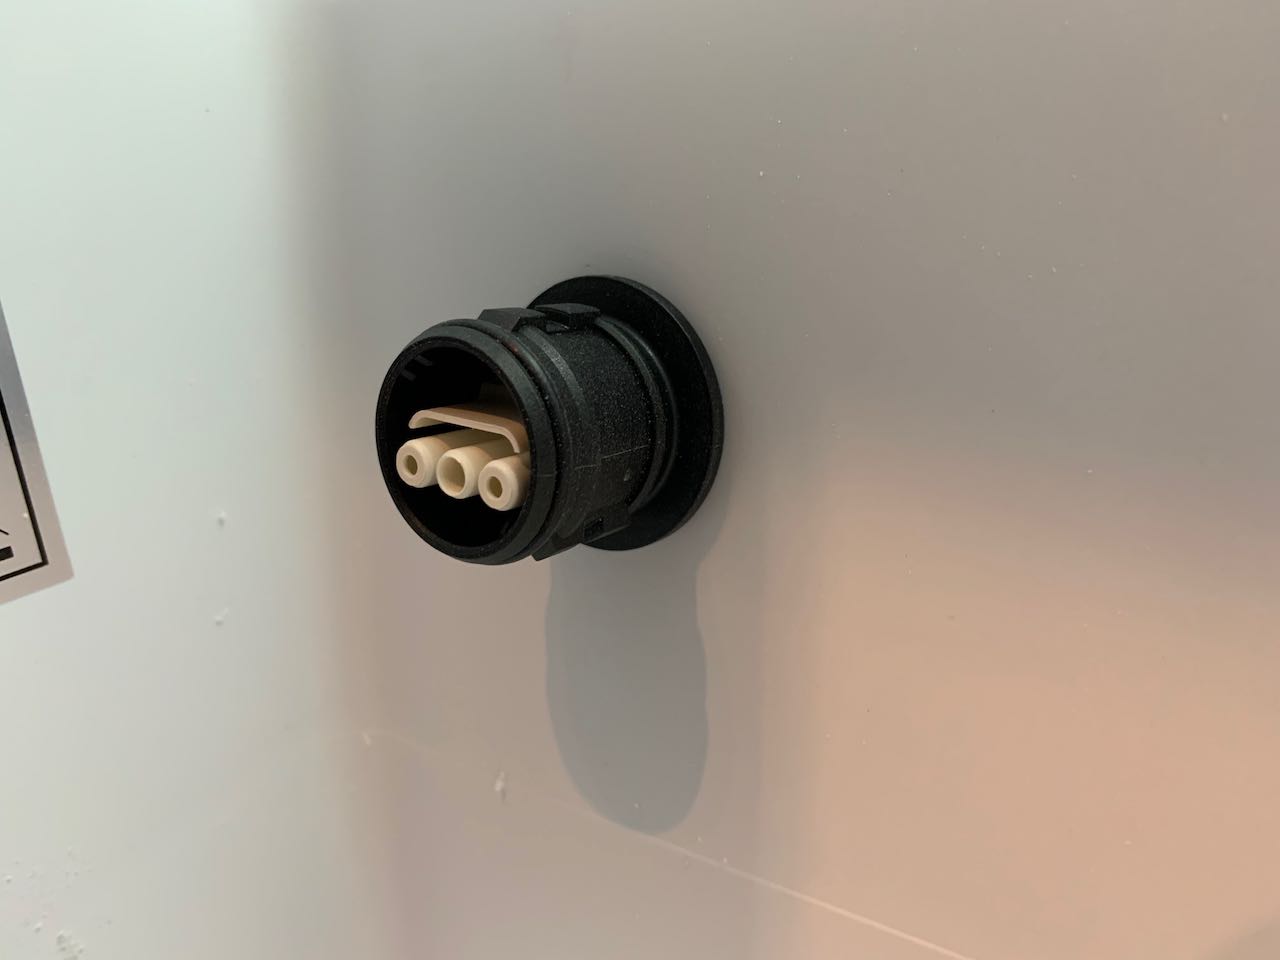 A photo showing the installed socket